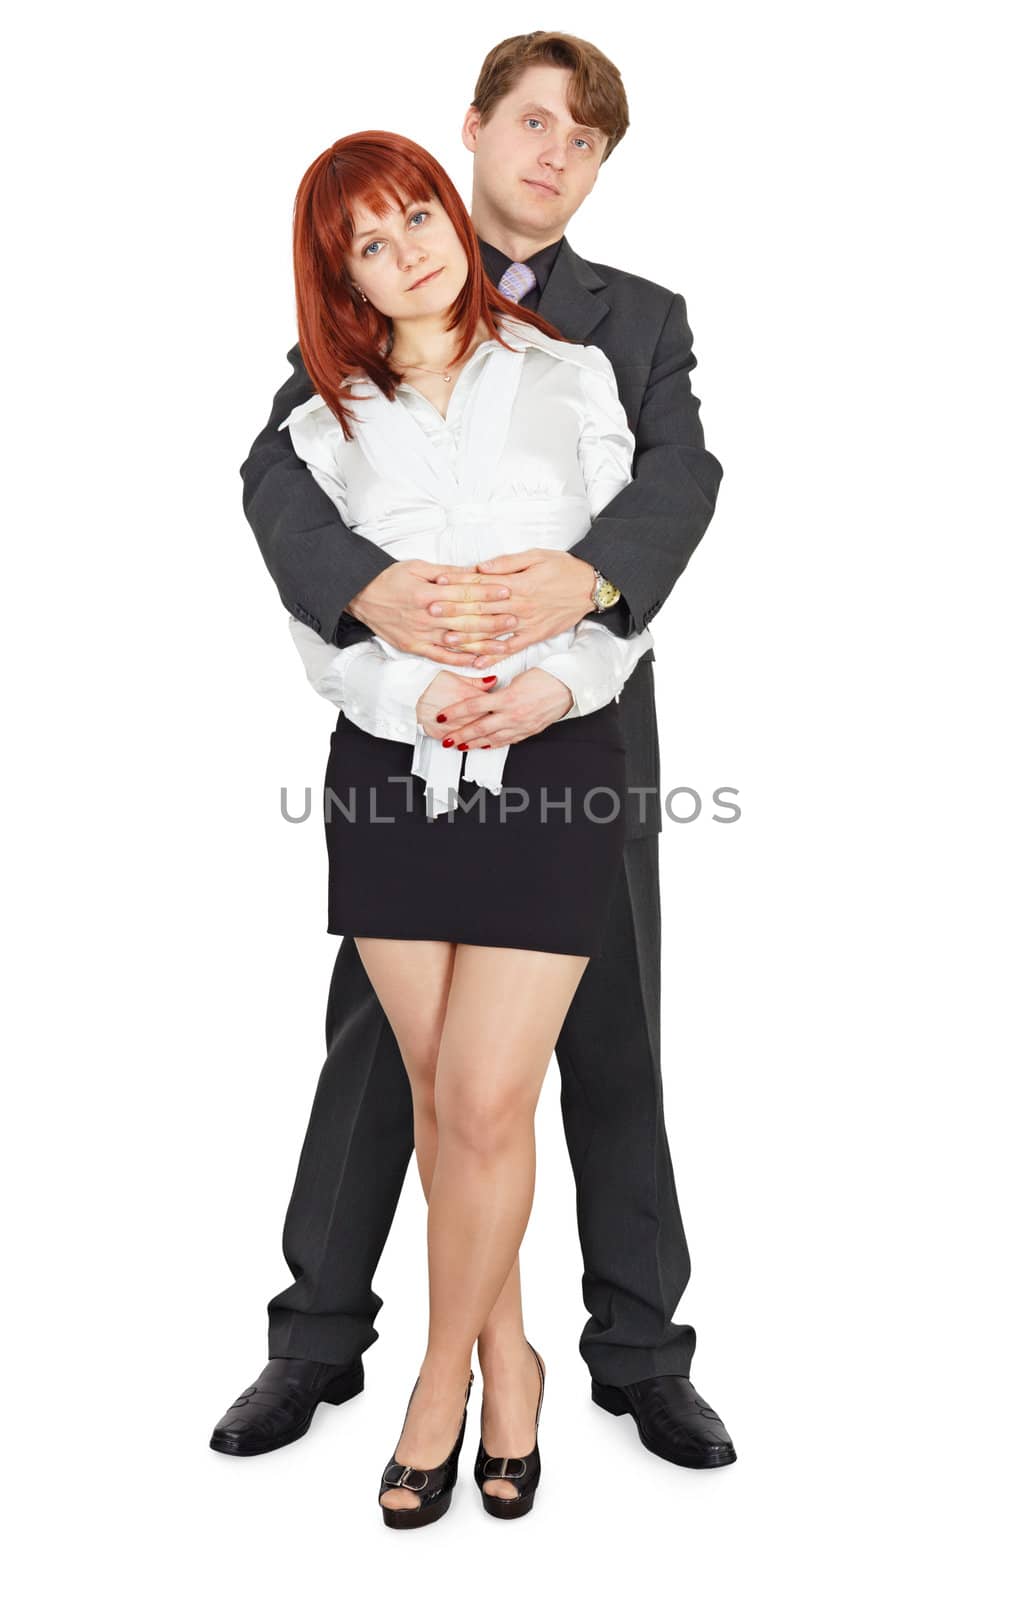 A young man embraces a beautiful girl on white